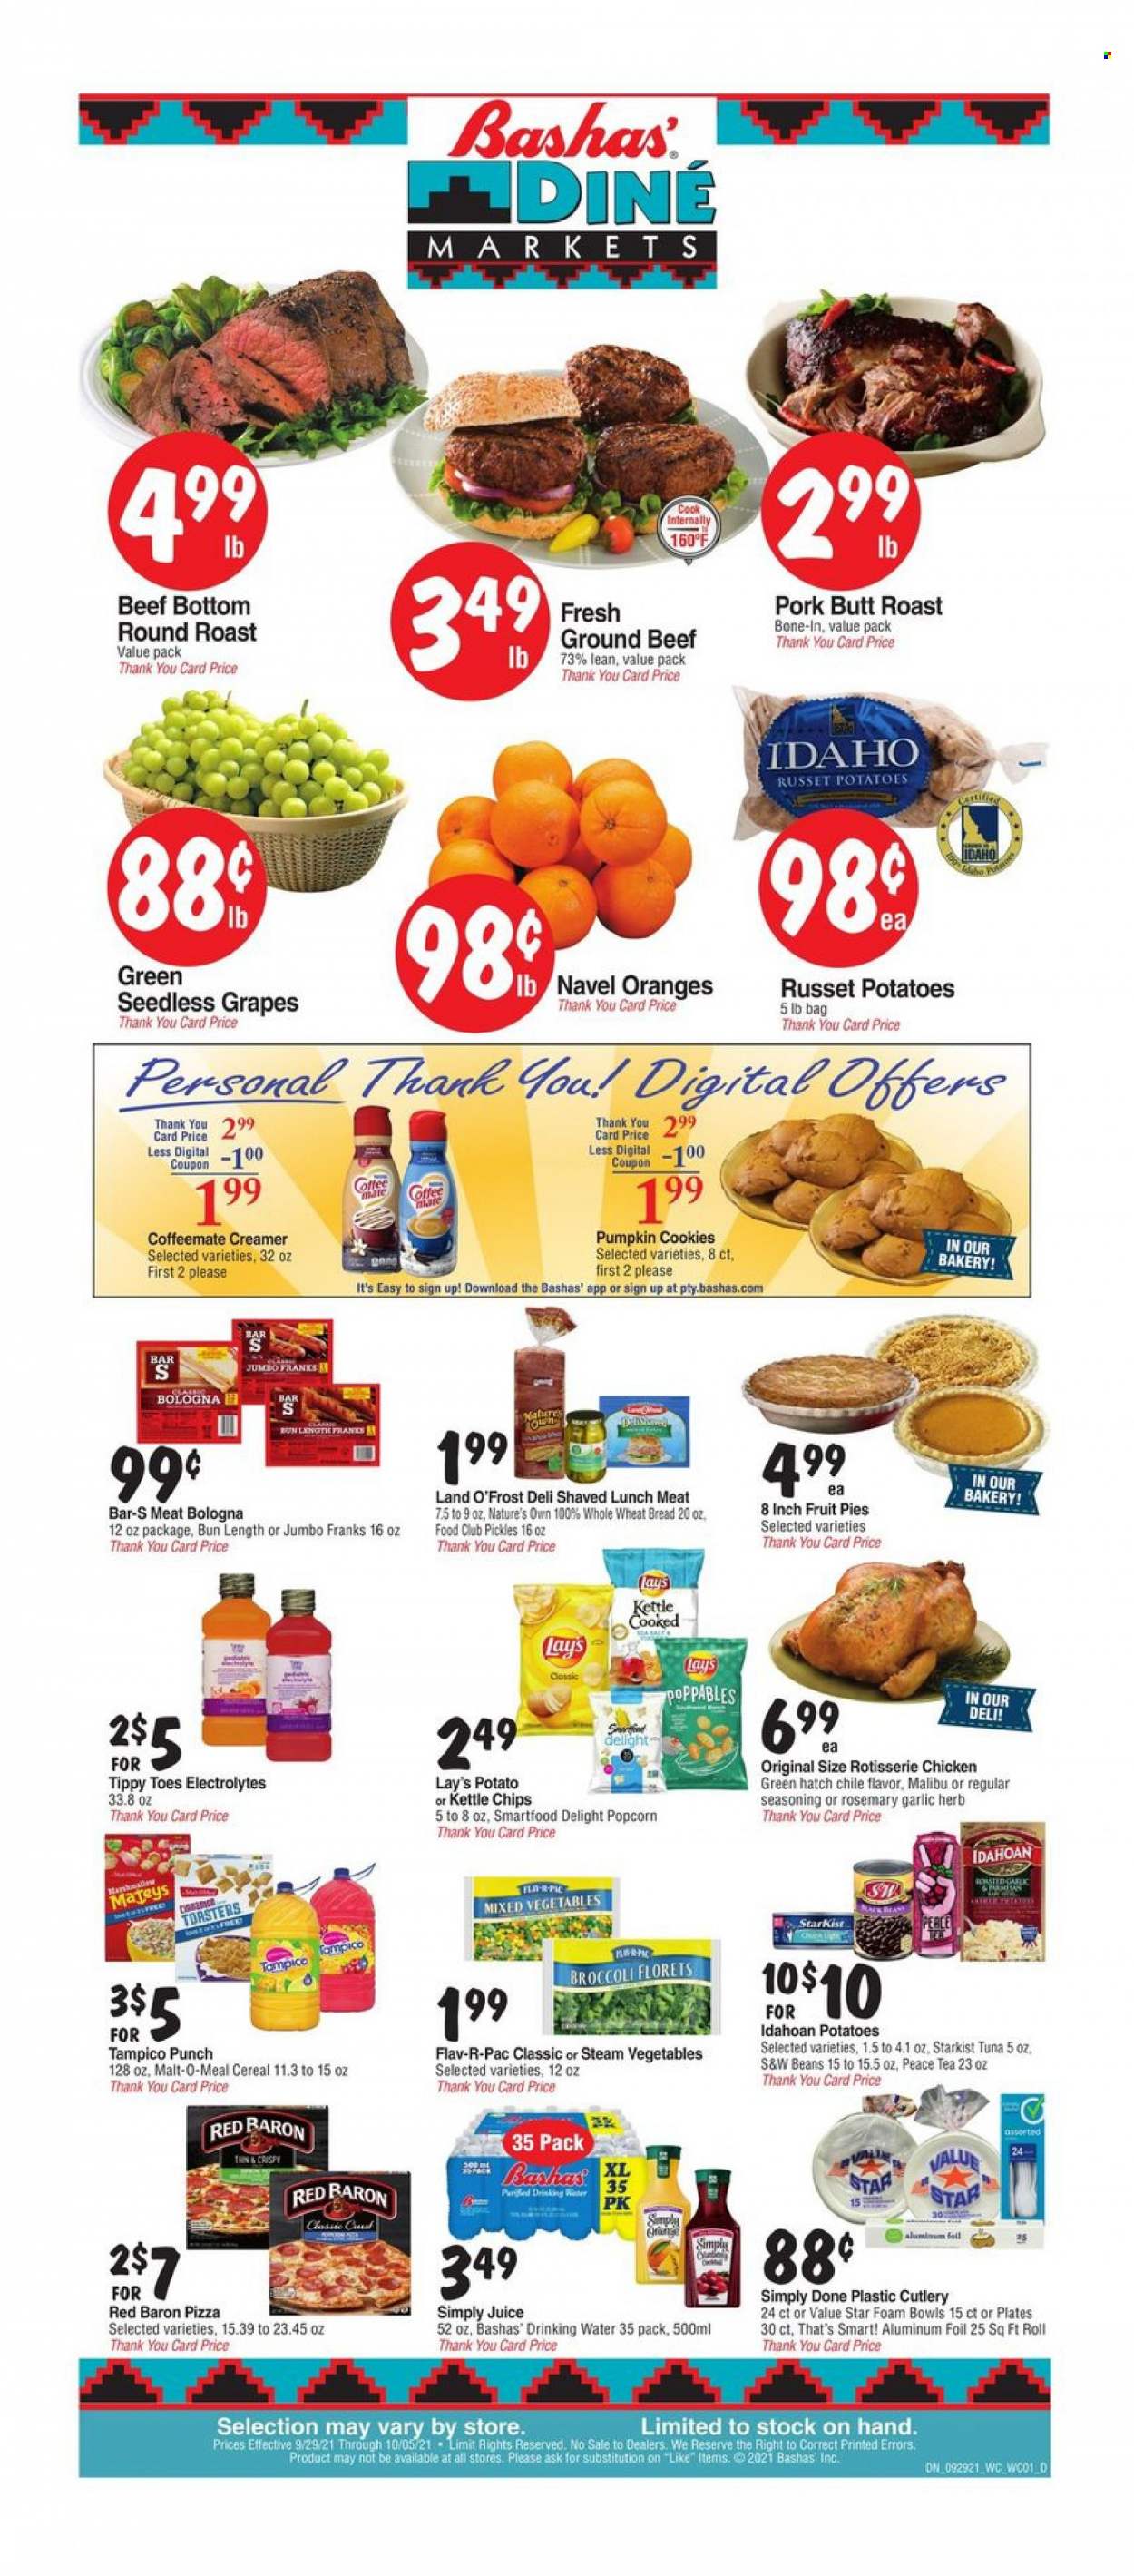 thumbnail - Bashas' Diné Markets Flyer - 09/29/2021 - 10/05/2021 - Sales products - seedless grapes, wheat bread, broccoli, garlic, russet potatoes, grapes, oranges, tuna, StarKist, pizza, chicken roast, lunch meat, creamer, mixed vegetables, Red Baron, cookies, chips, Lay’s, Smartfood, popcorn, malt, pickles, cereals, rosemary, spice, juice, fruit punch, tea, coffee, Malibu, beef meat, ground beef, round roast, Nature's Own, navel oranges. Page 1.